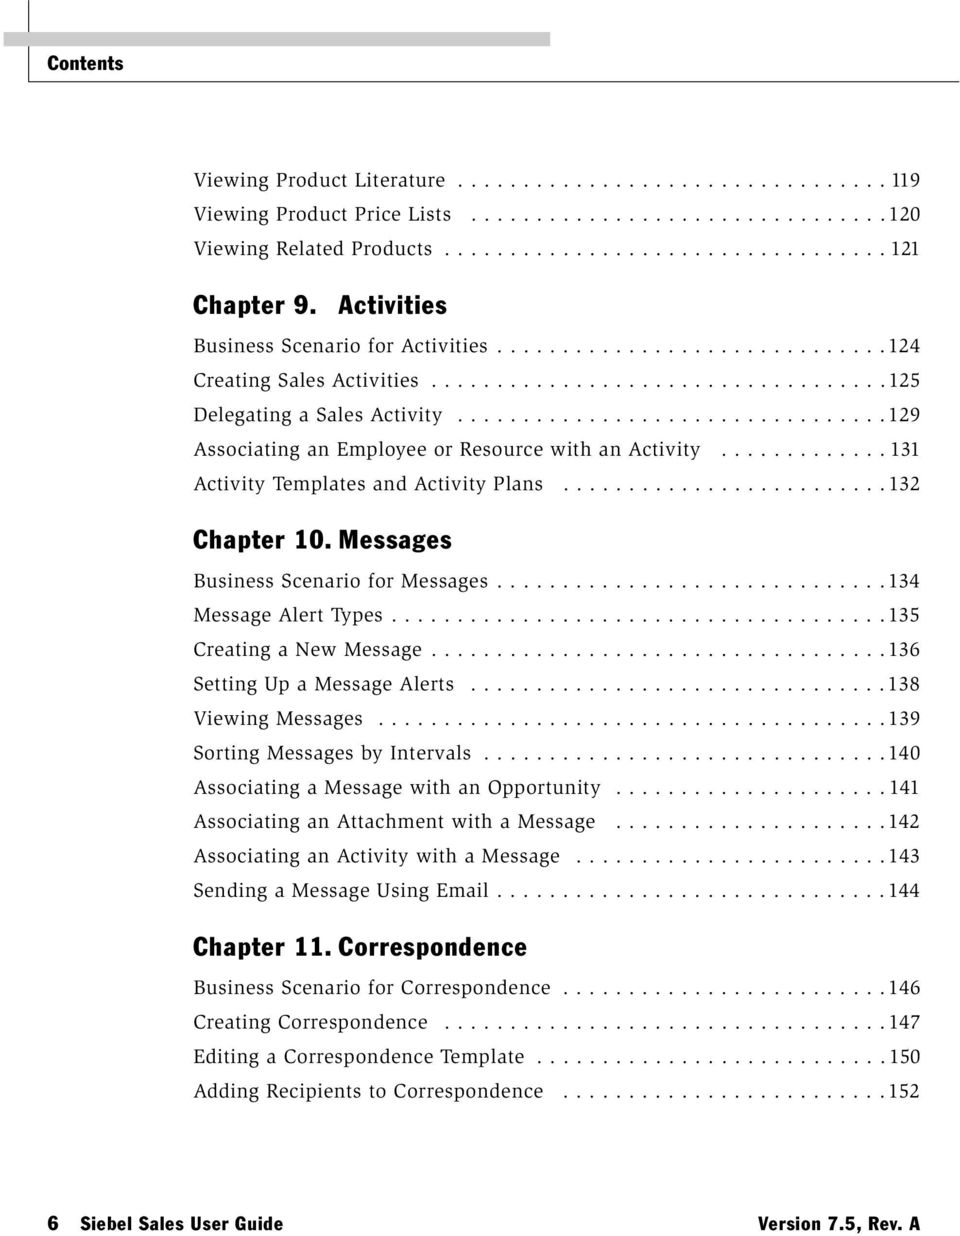 ................................129 Associating an Employee or Resource with an Activity............. 131 Activity Templates and Activity Plans.........................132 Chapter 10.